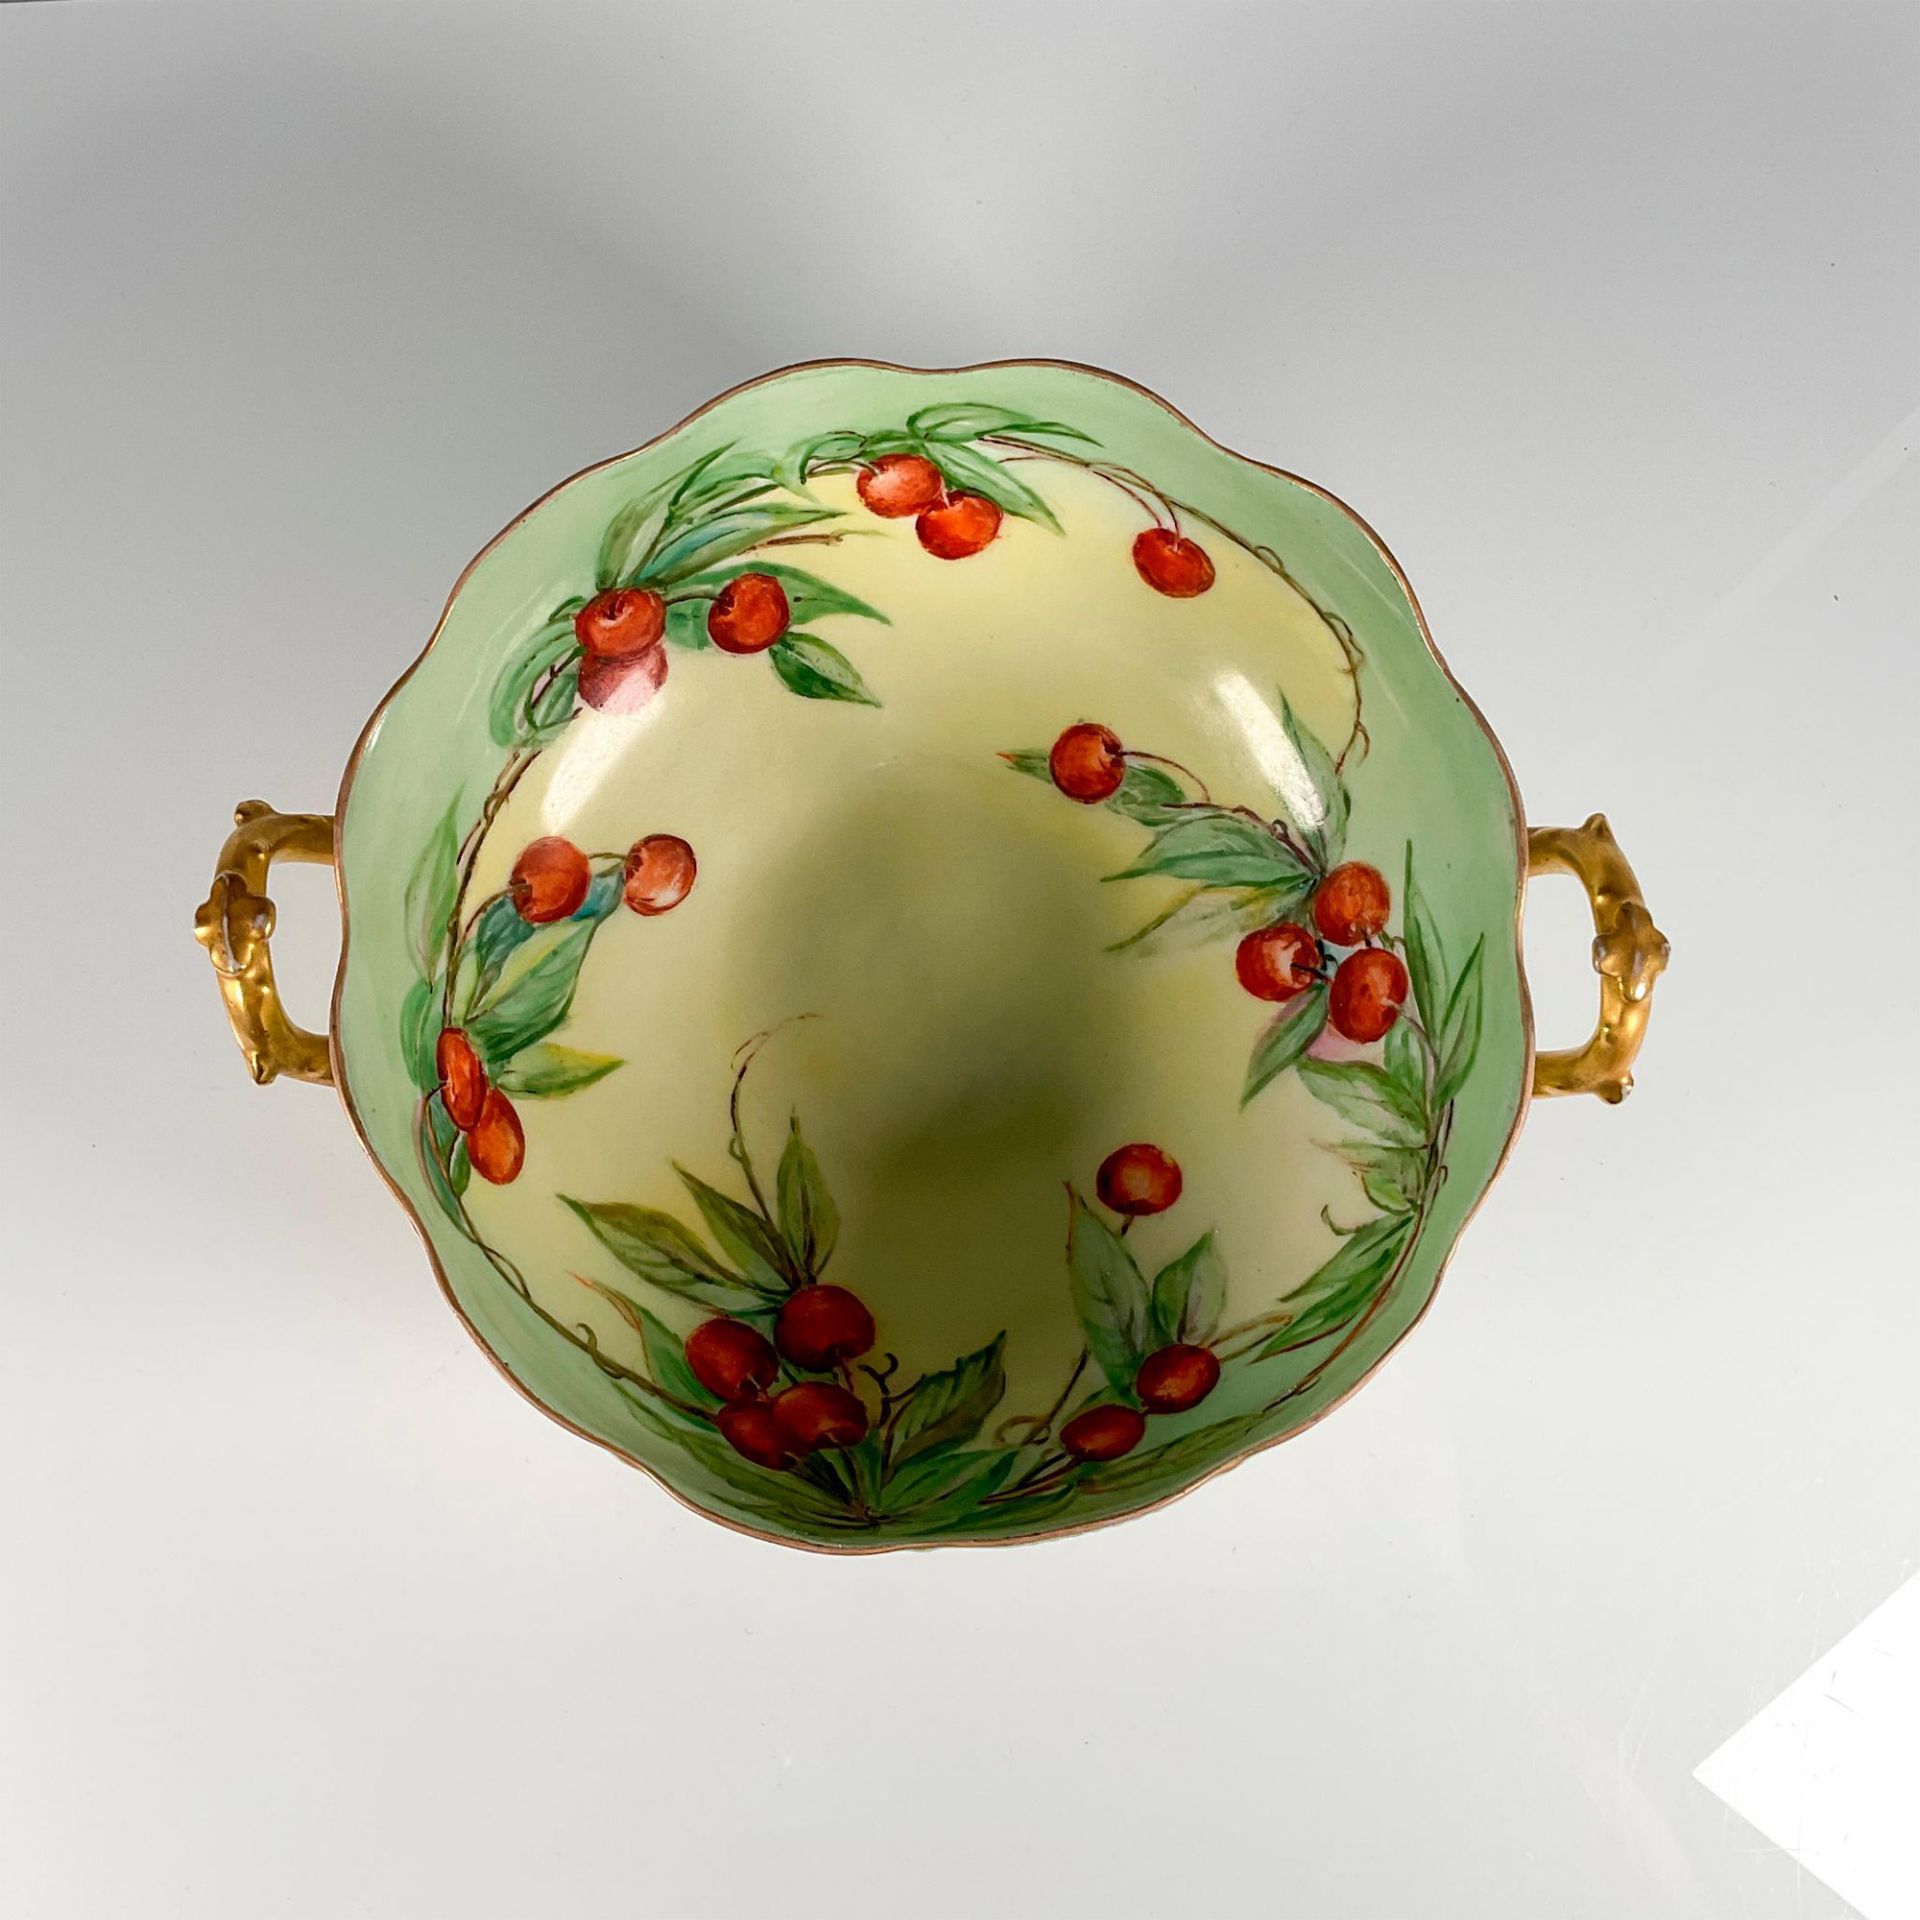 3pc T+V Limoges/Rosenthal Porcelain Bowl and Cups, Cherries - Image 3 of 7